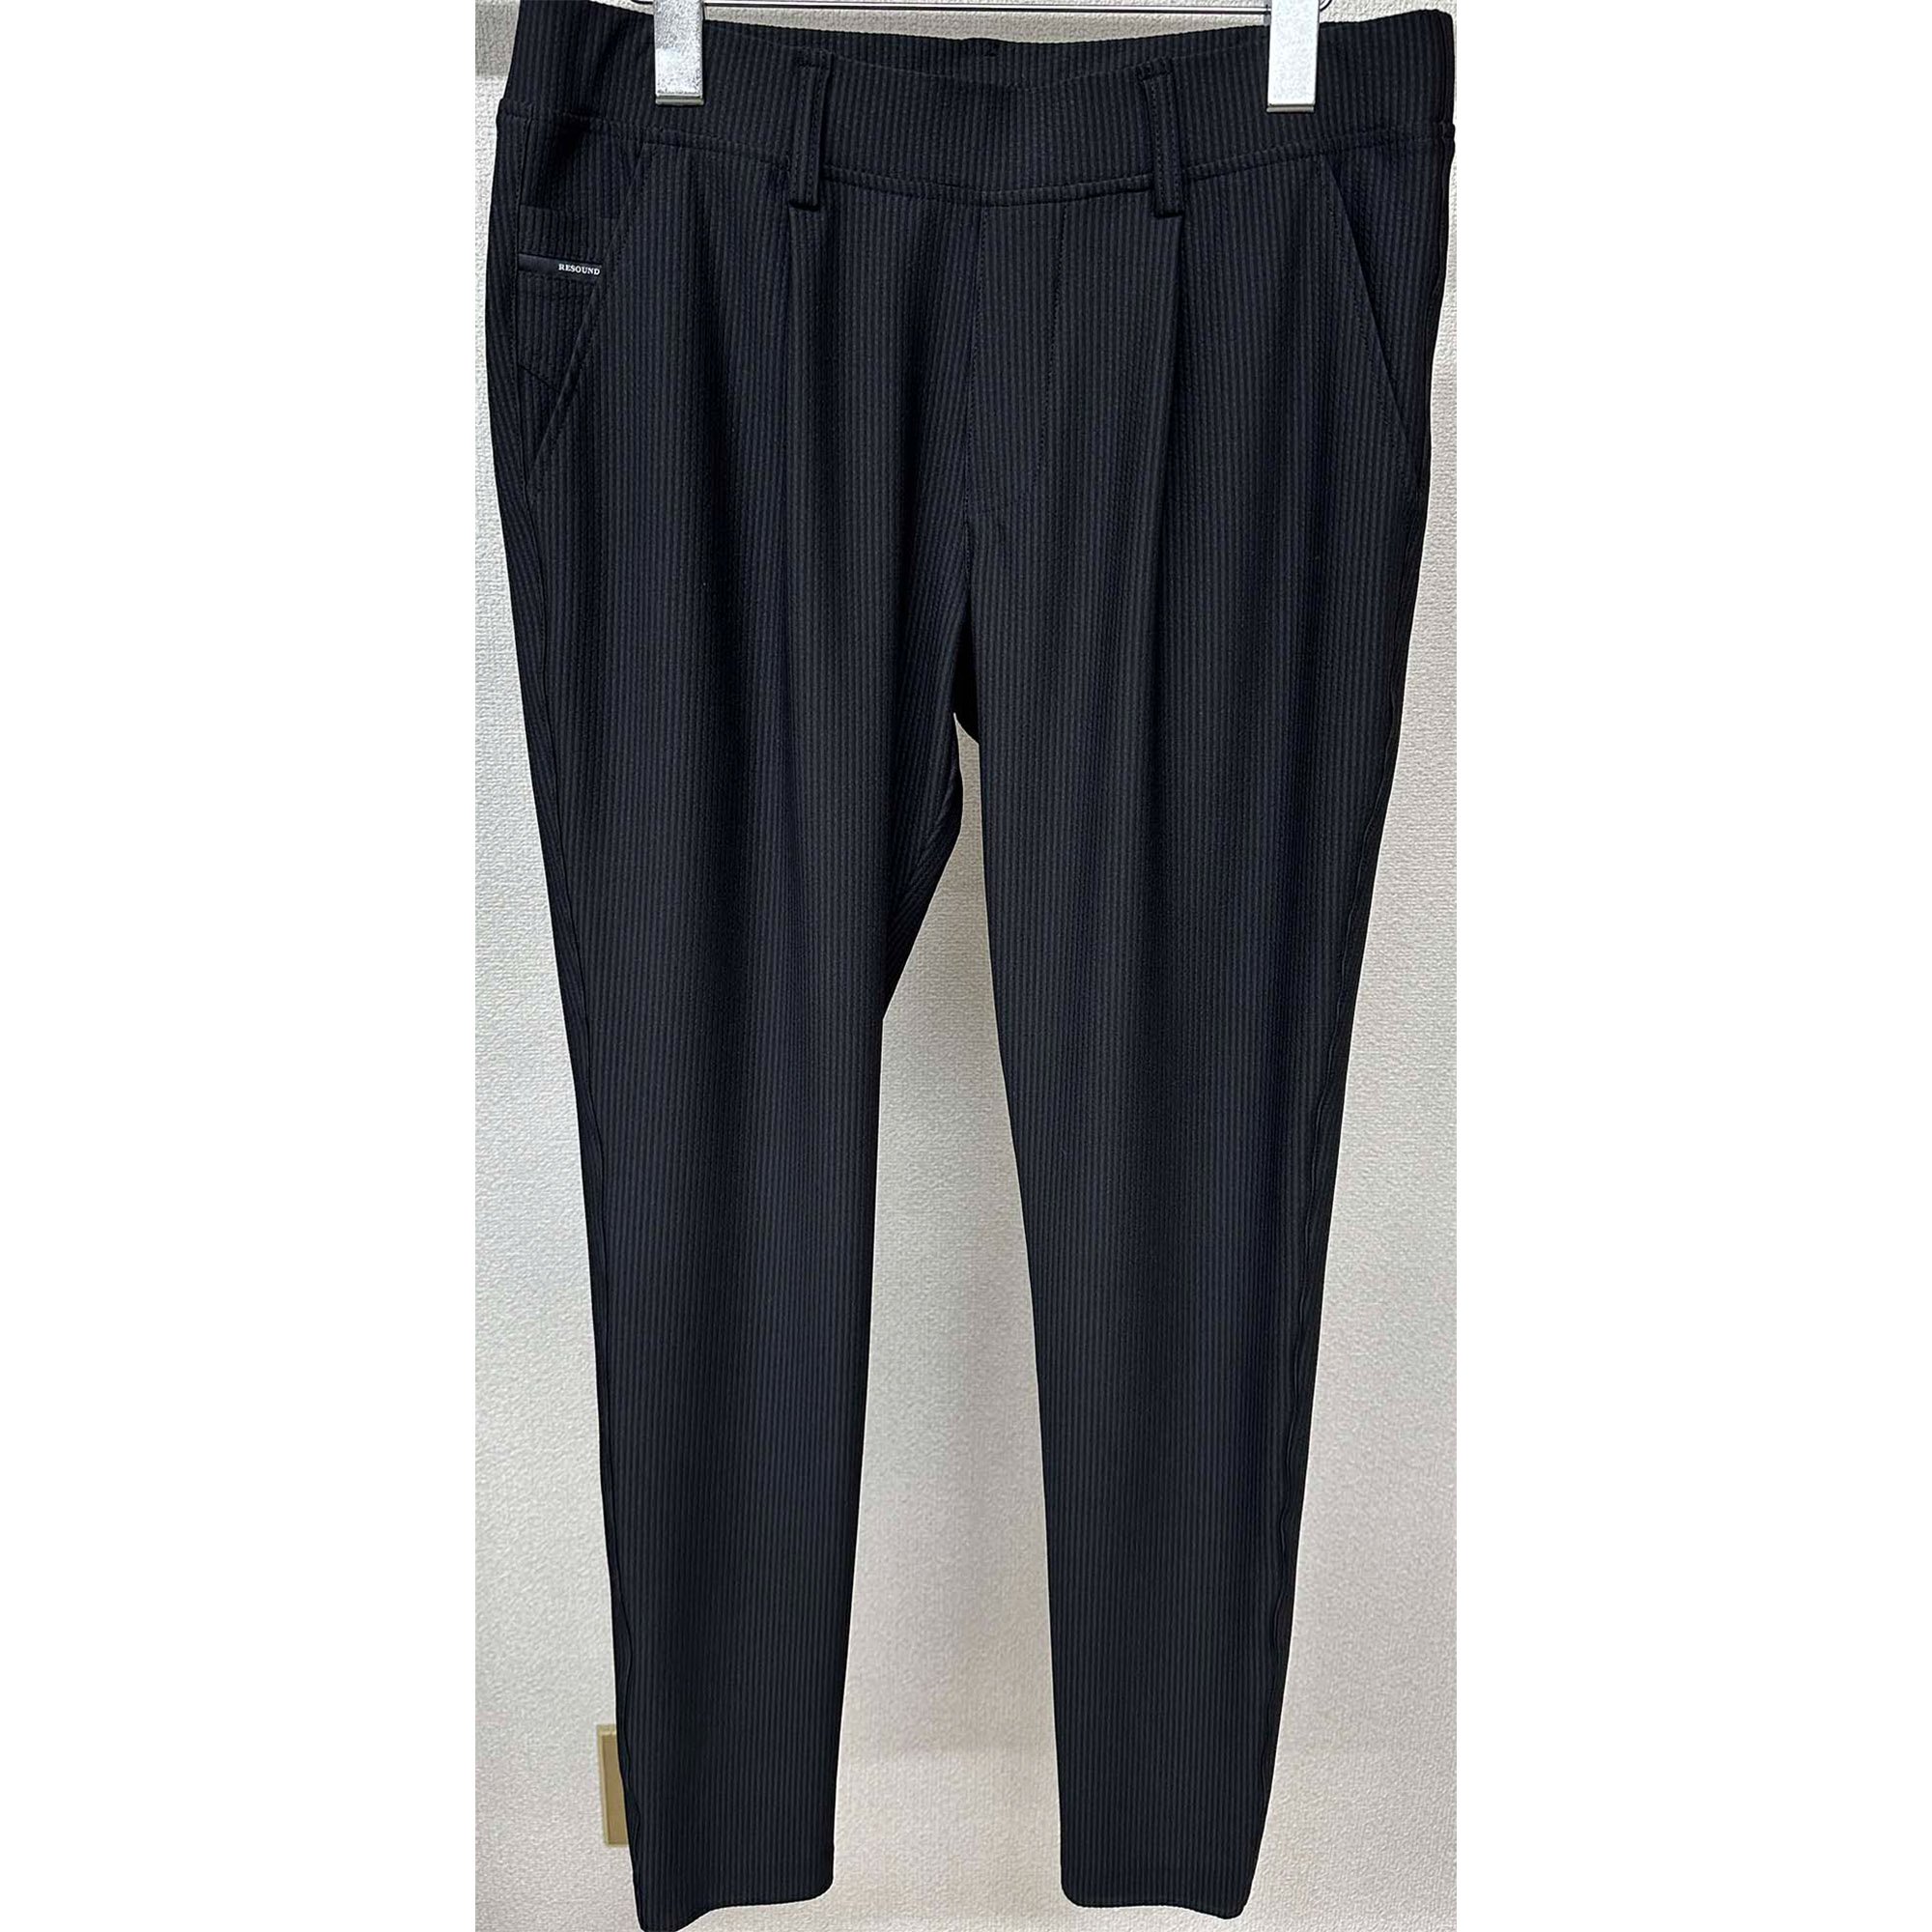 <img class='new_mark_img1' src='https://img.shop-pro.jp/img/new/icons1.gif' style='border:none;display:inline;margin:0px;padding:0px;width:auto;' />CHRIS EASY TUCK PANTS BLACK